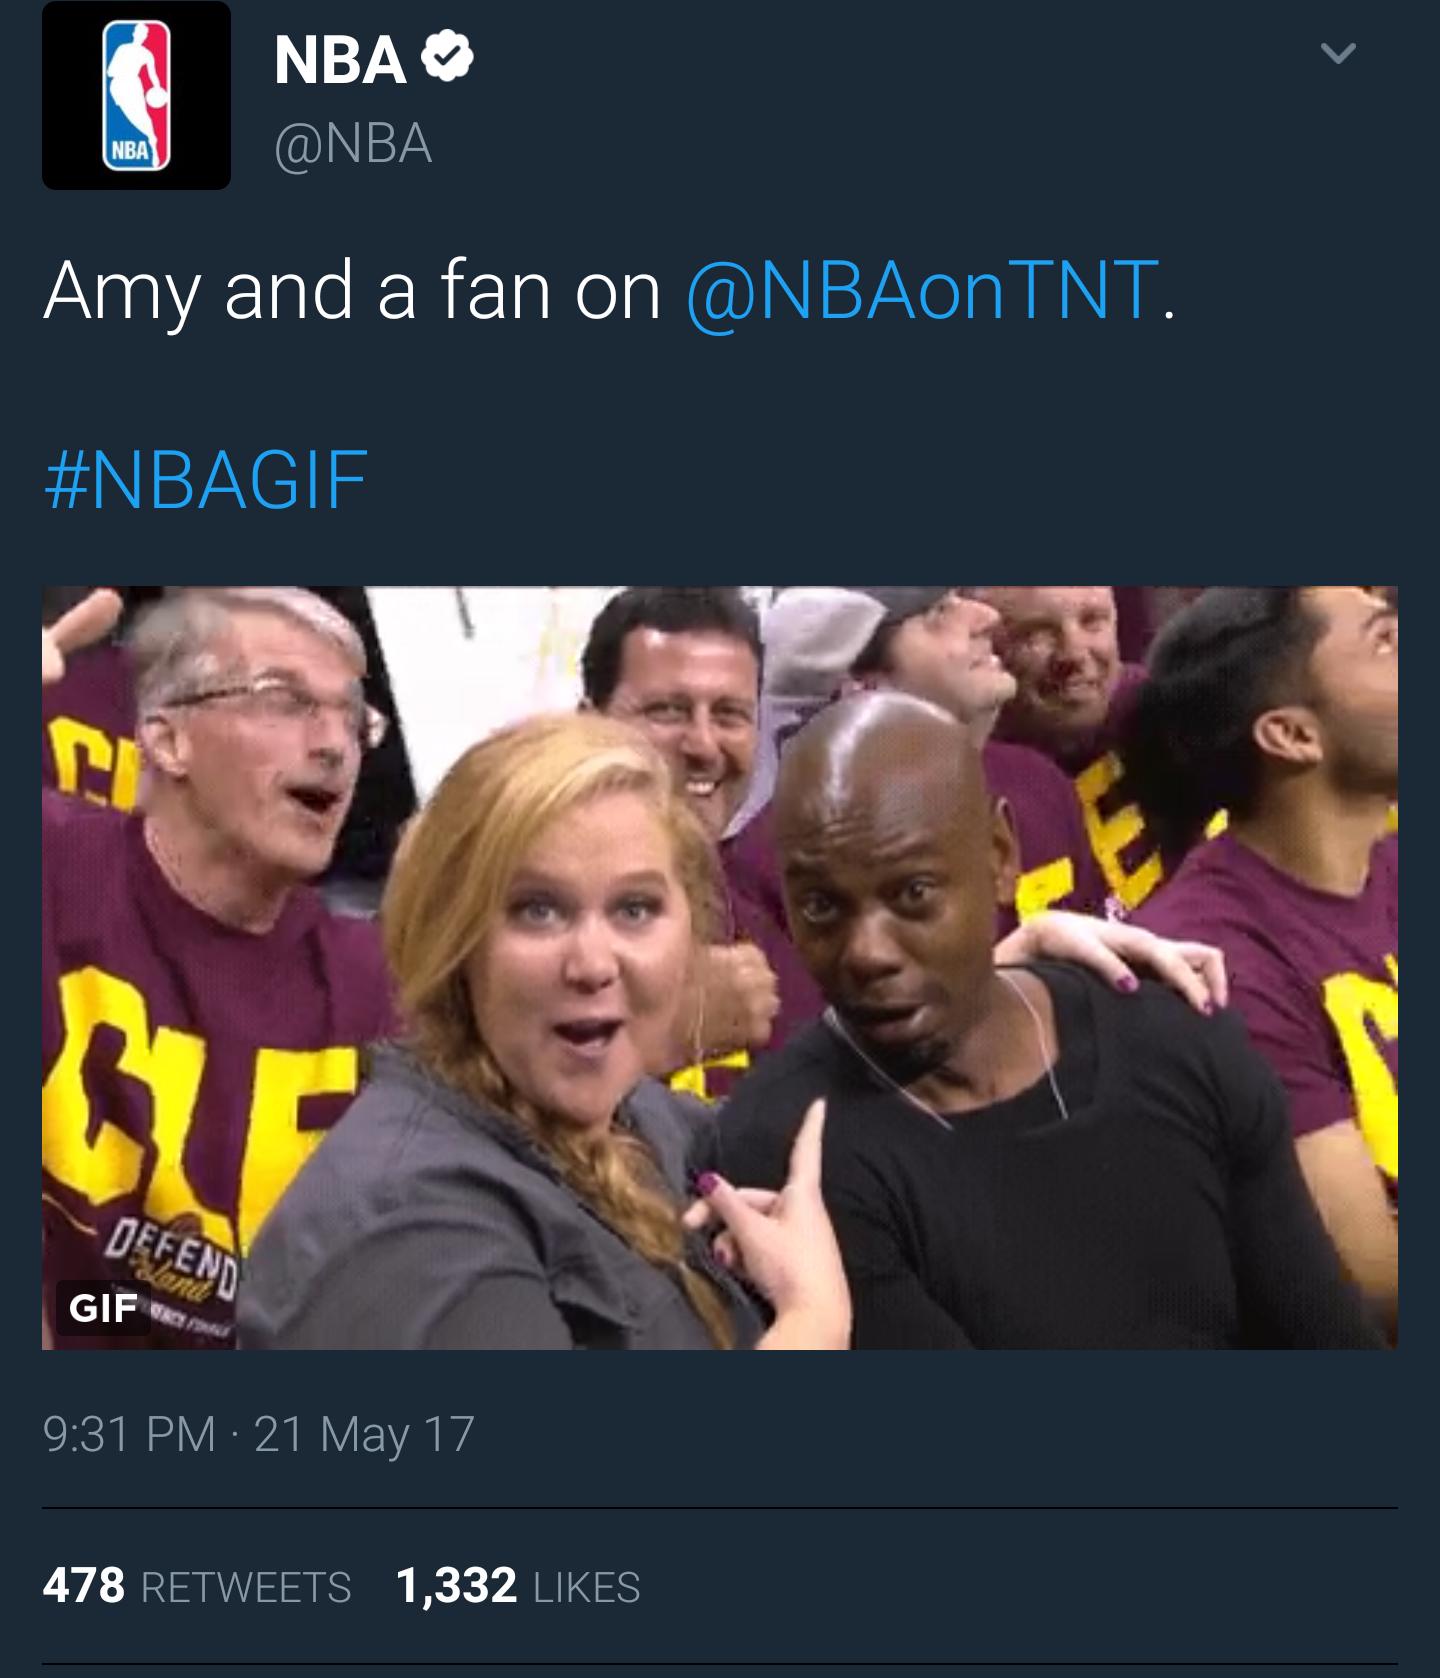 Amy and Fan at a NBA game